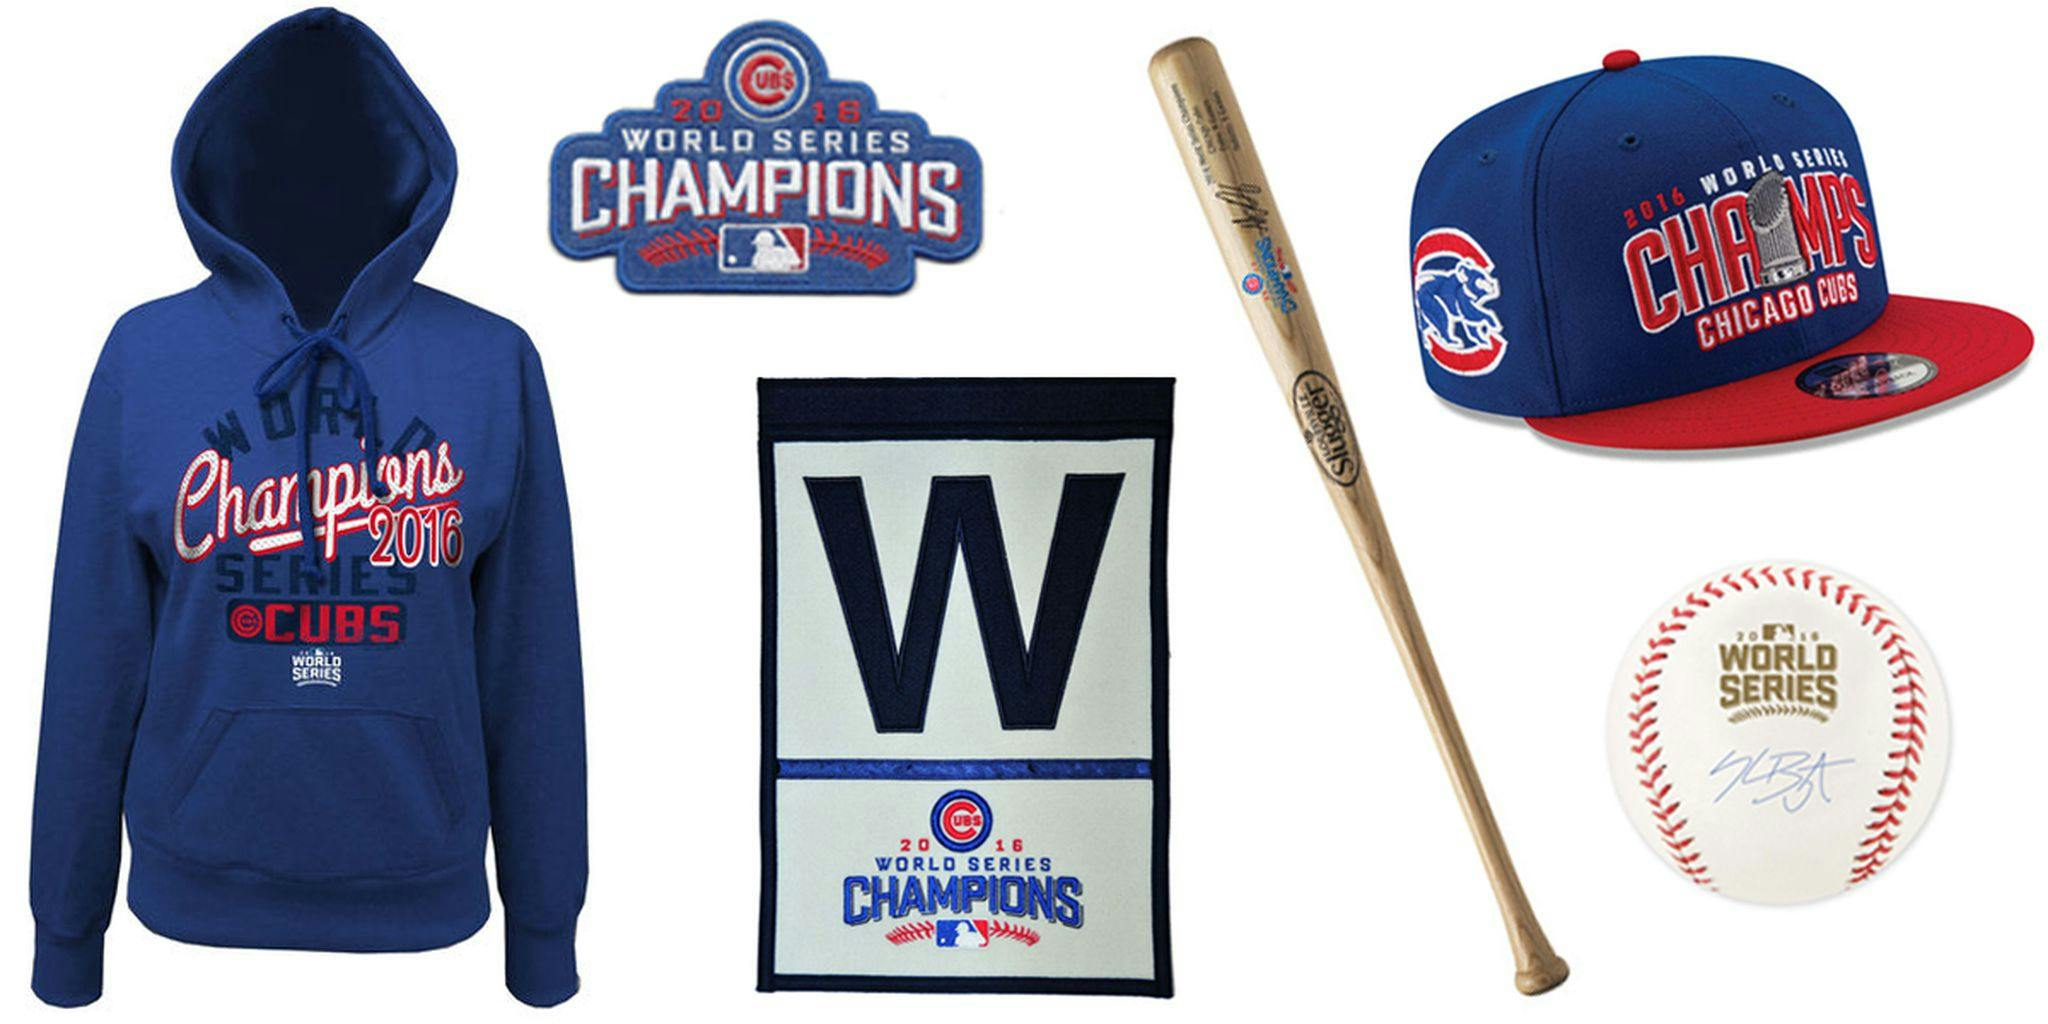 Cubs World Series gear selling out in seconds